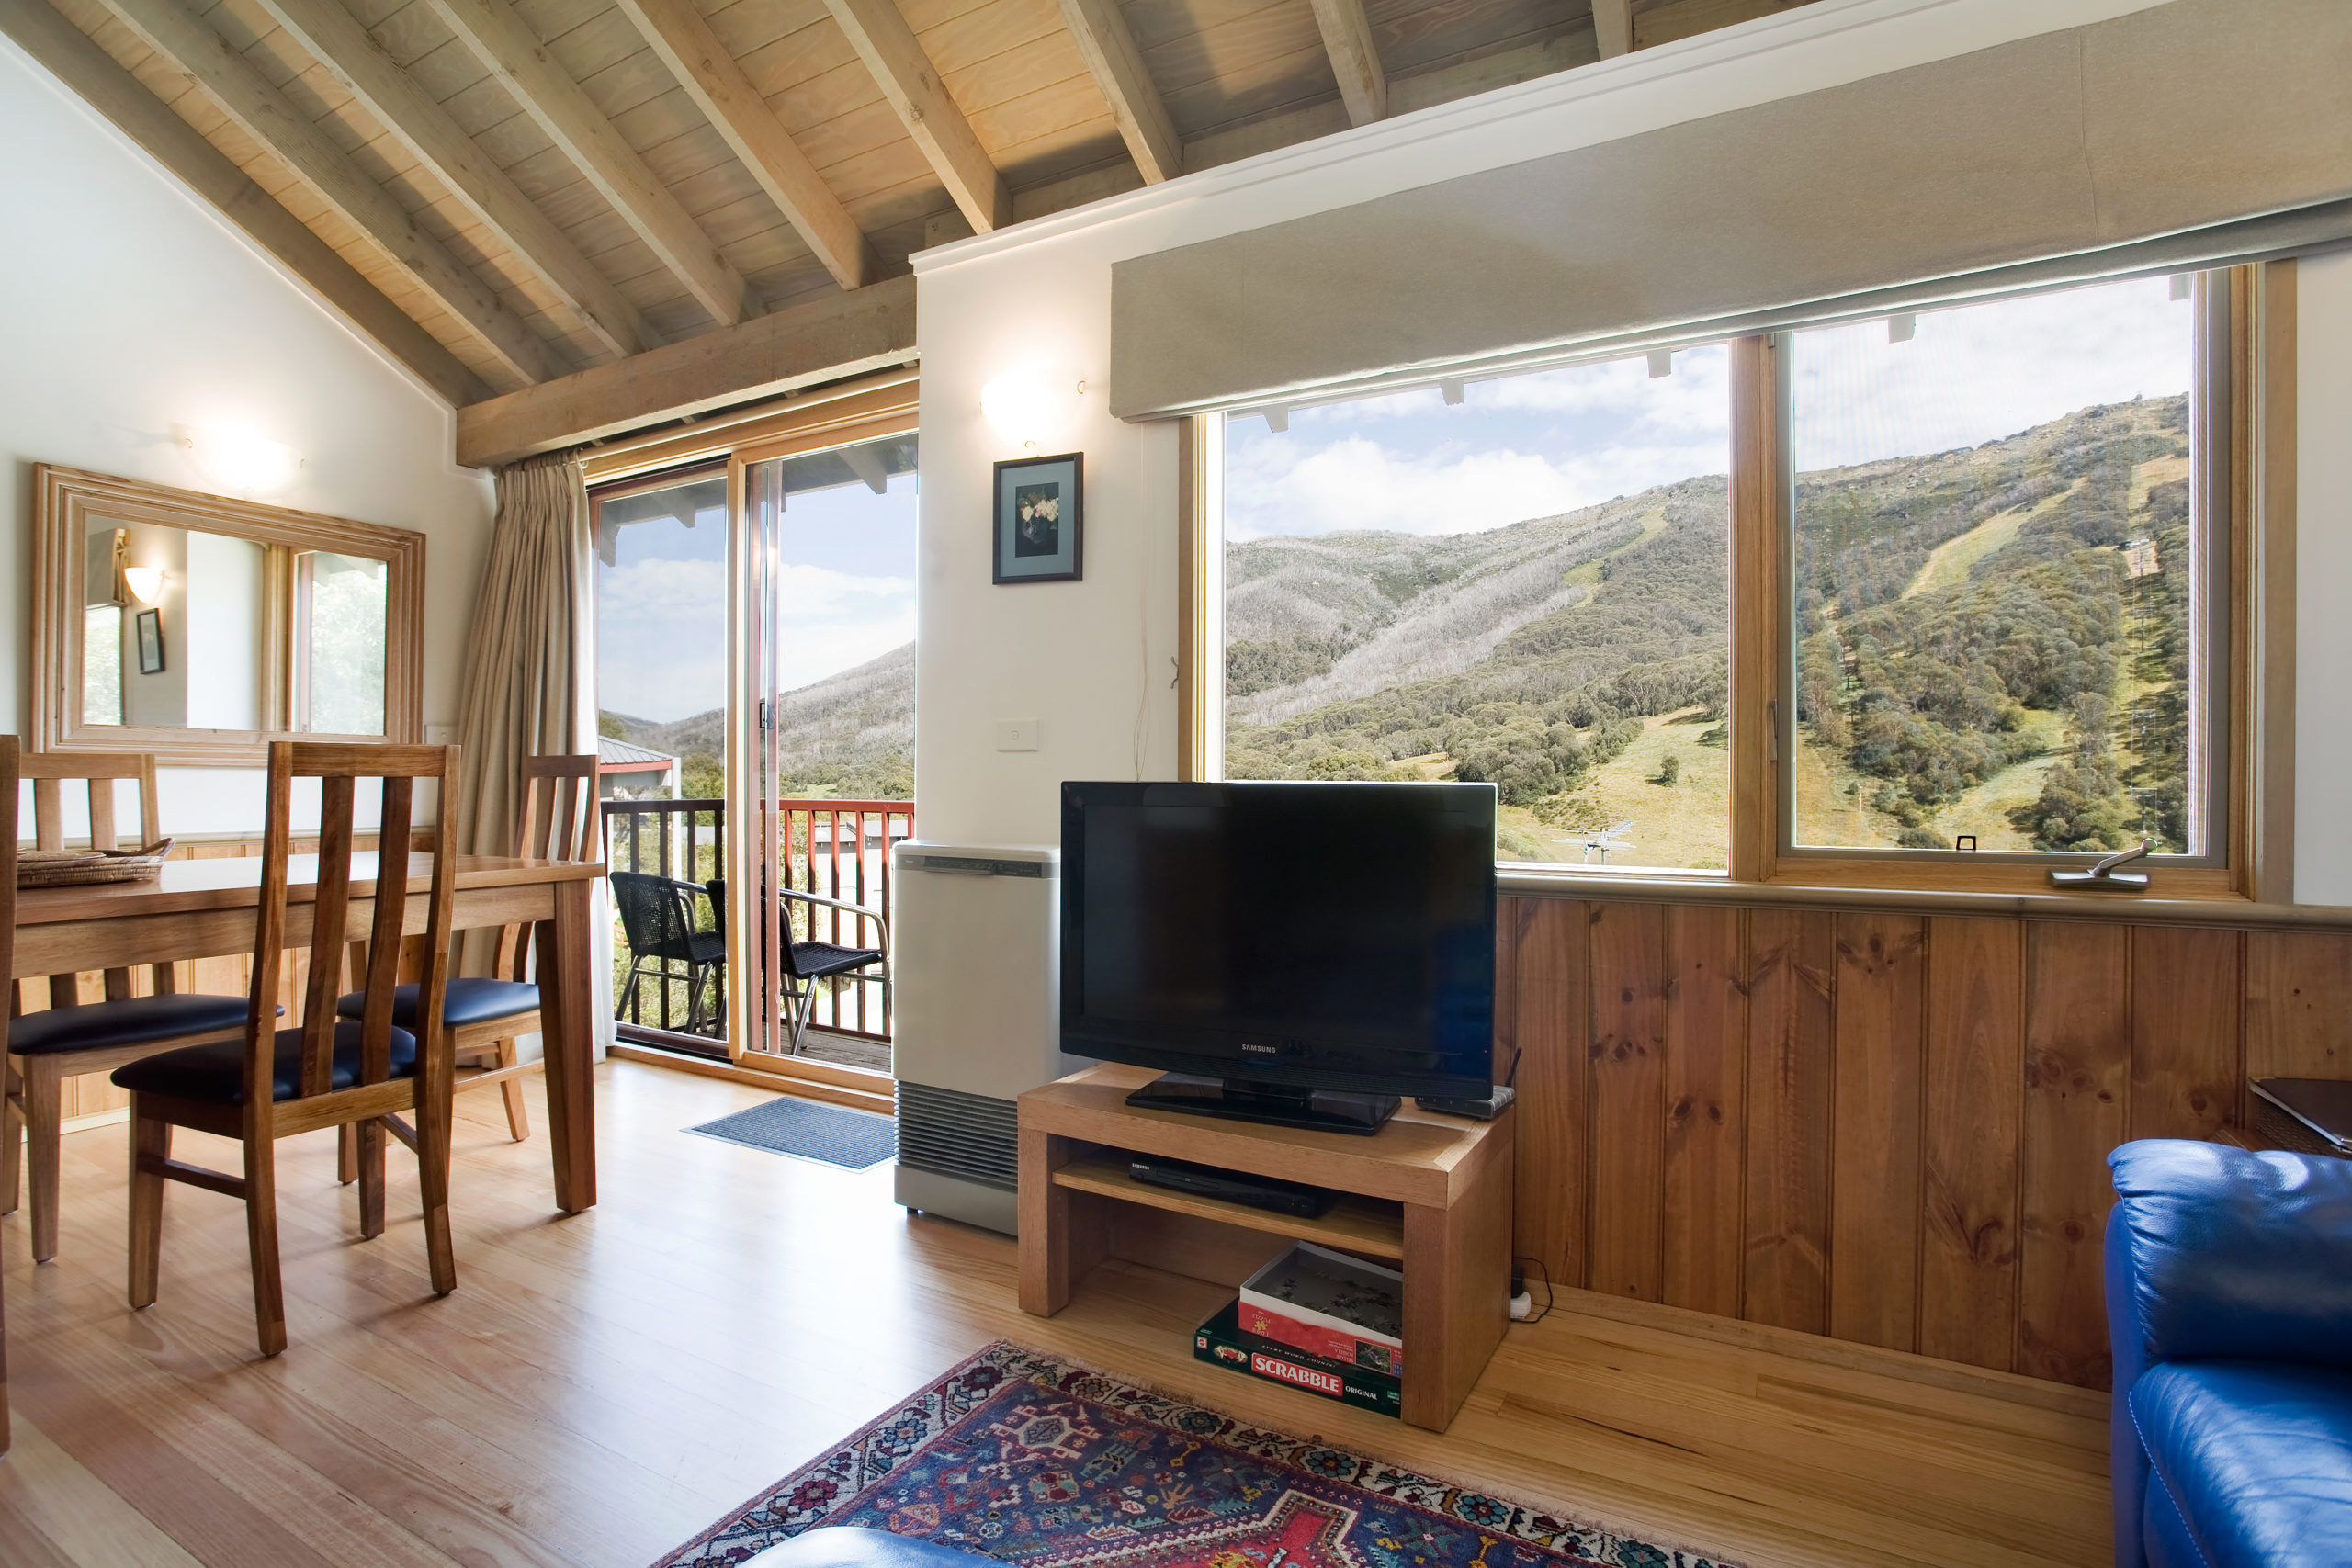 One Bedroom + Loft Townhouse with Private Balcony and Stunning Mountain Views – $810,000